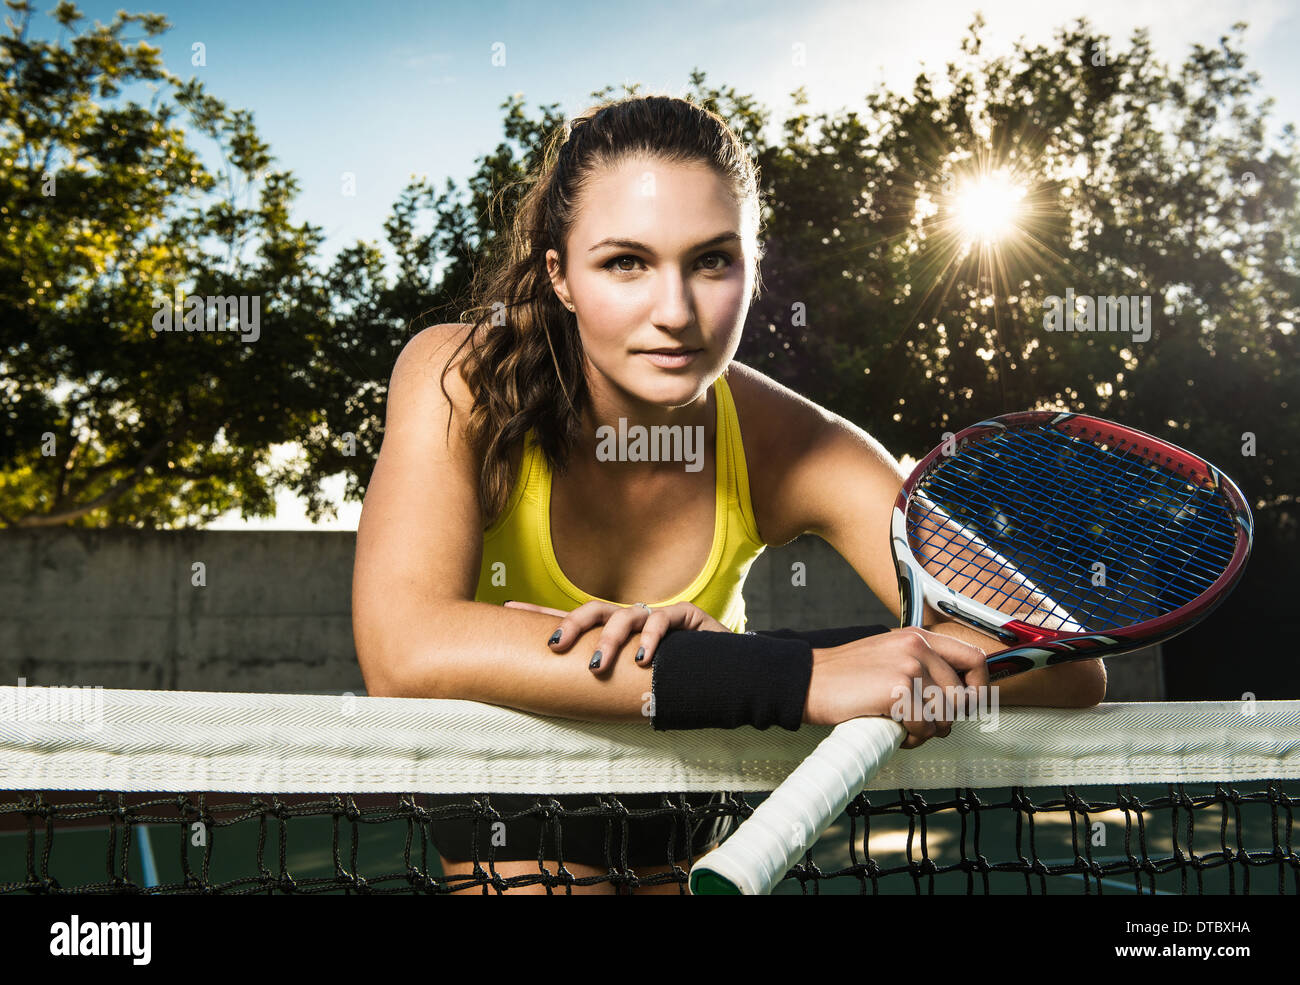 Tennis player holding racket leaning on net Banque D'Images